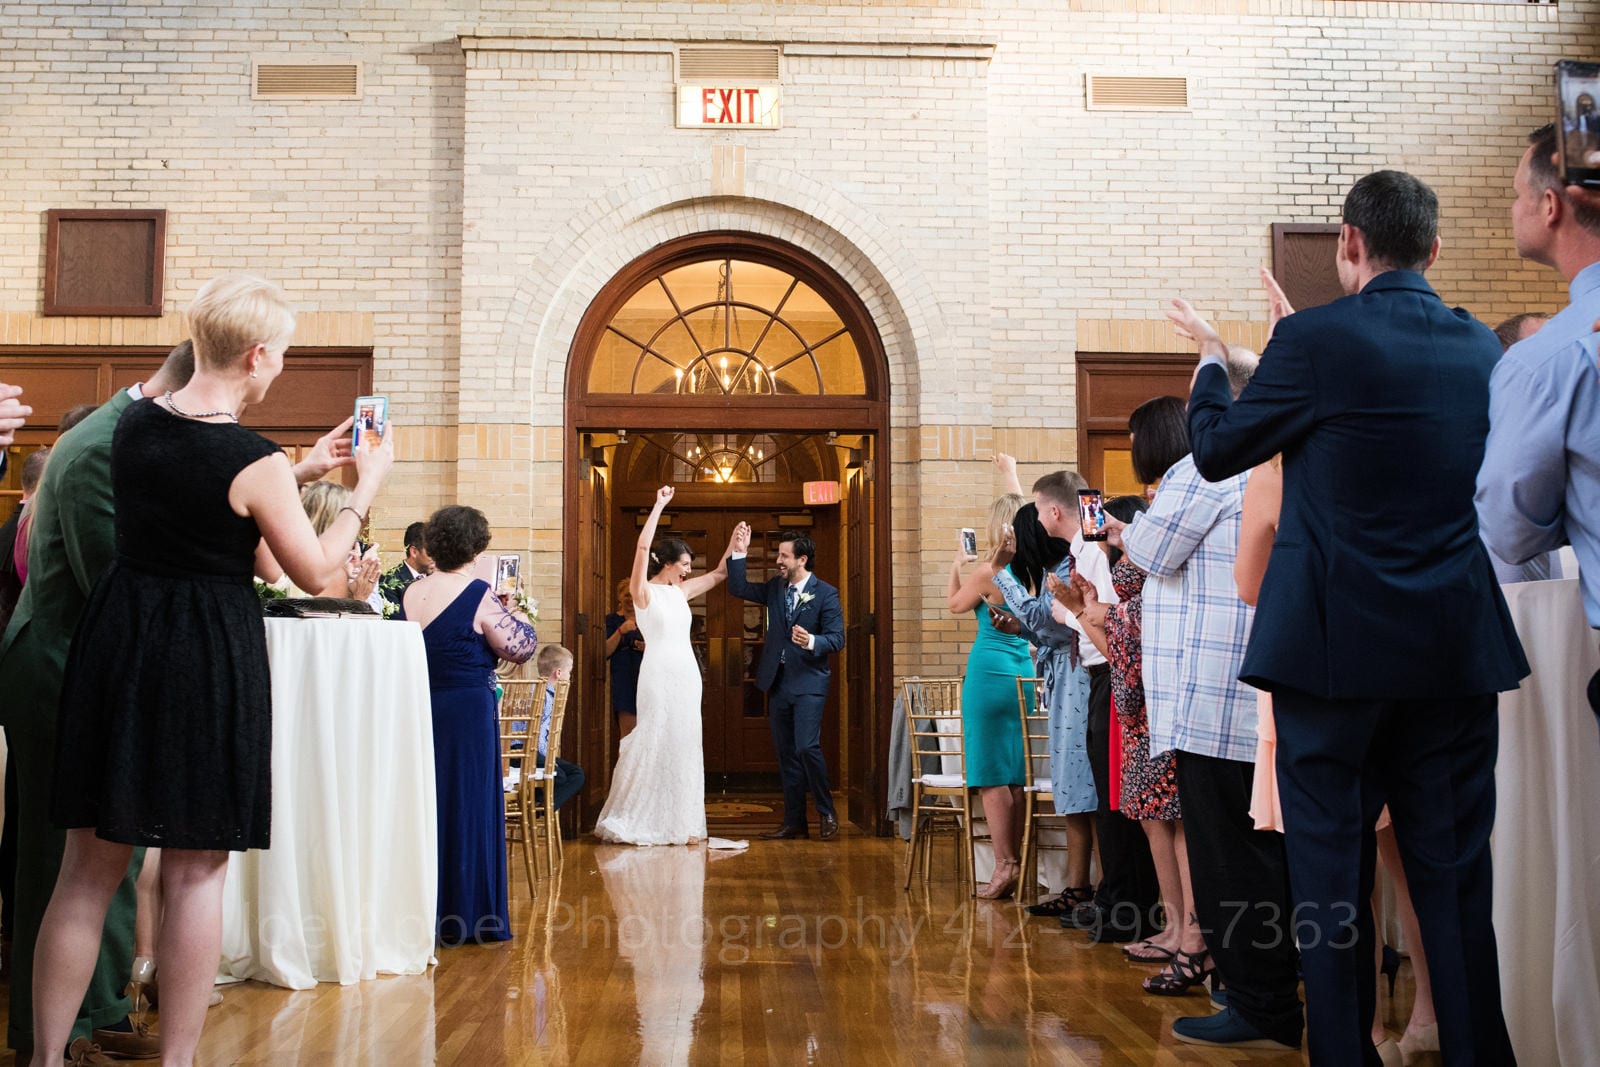 A bride raises her arms in triumph as she and her groom enter their St Francis Hall Washington DC wedding.